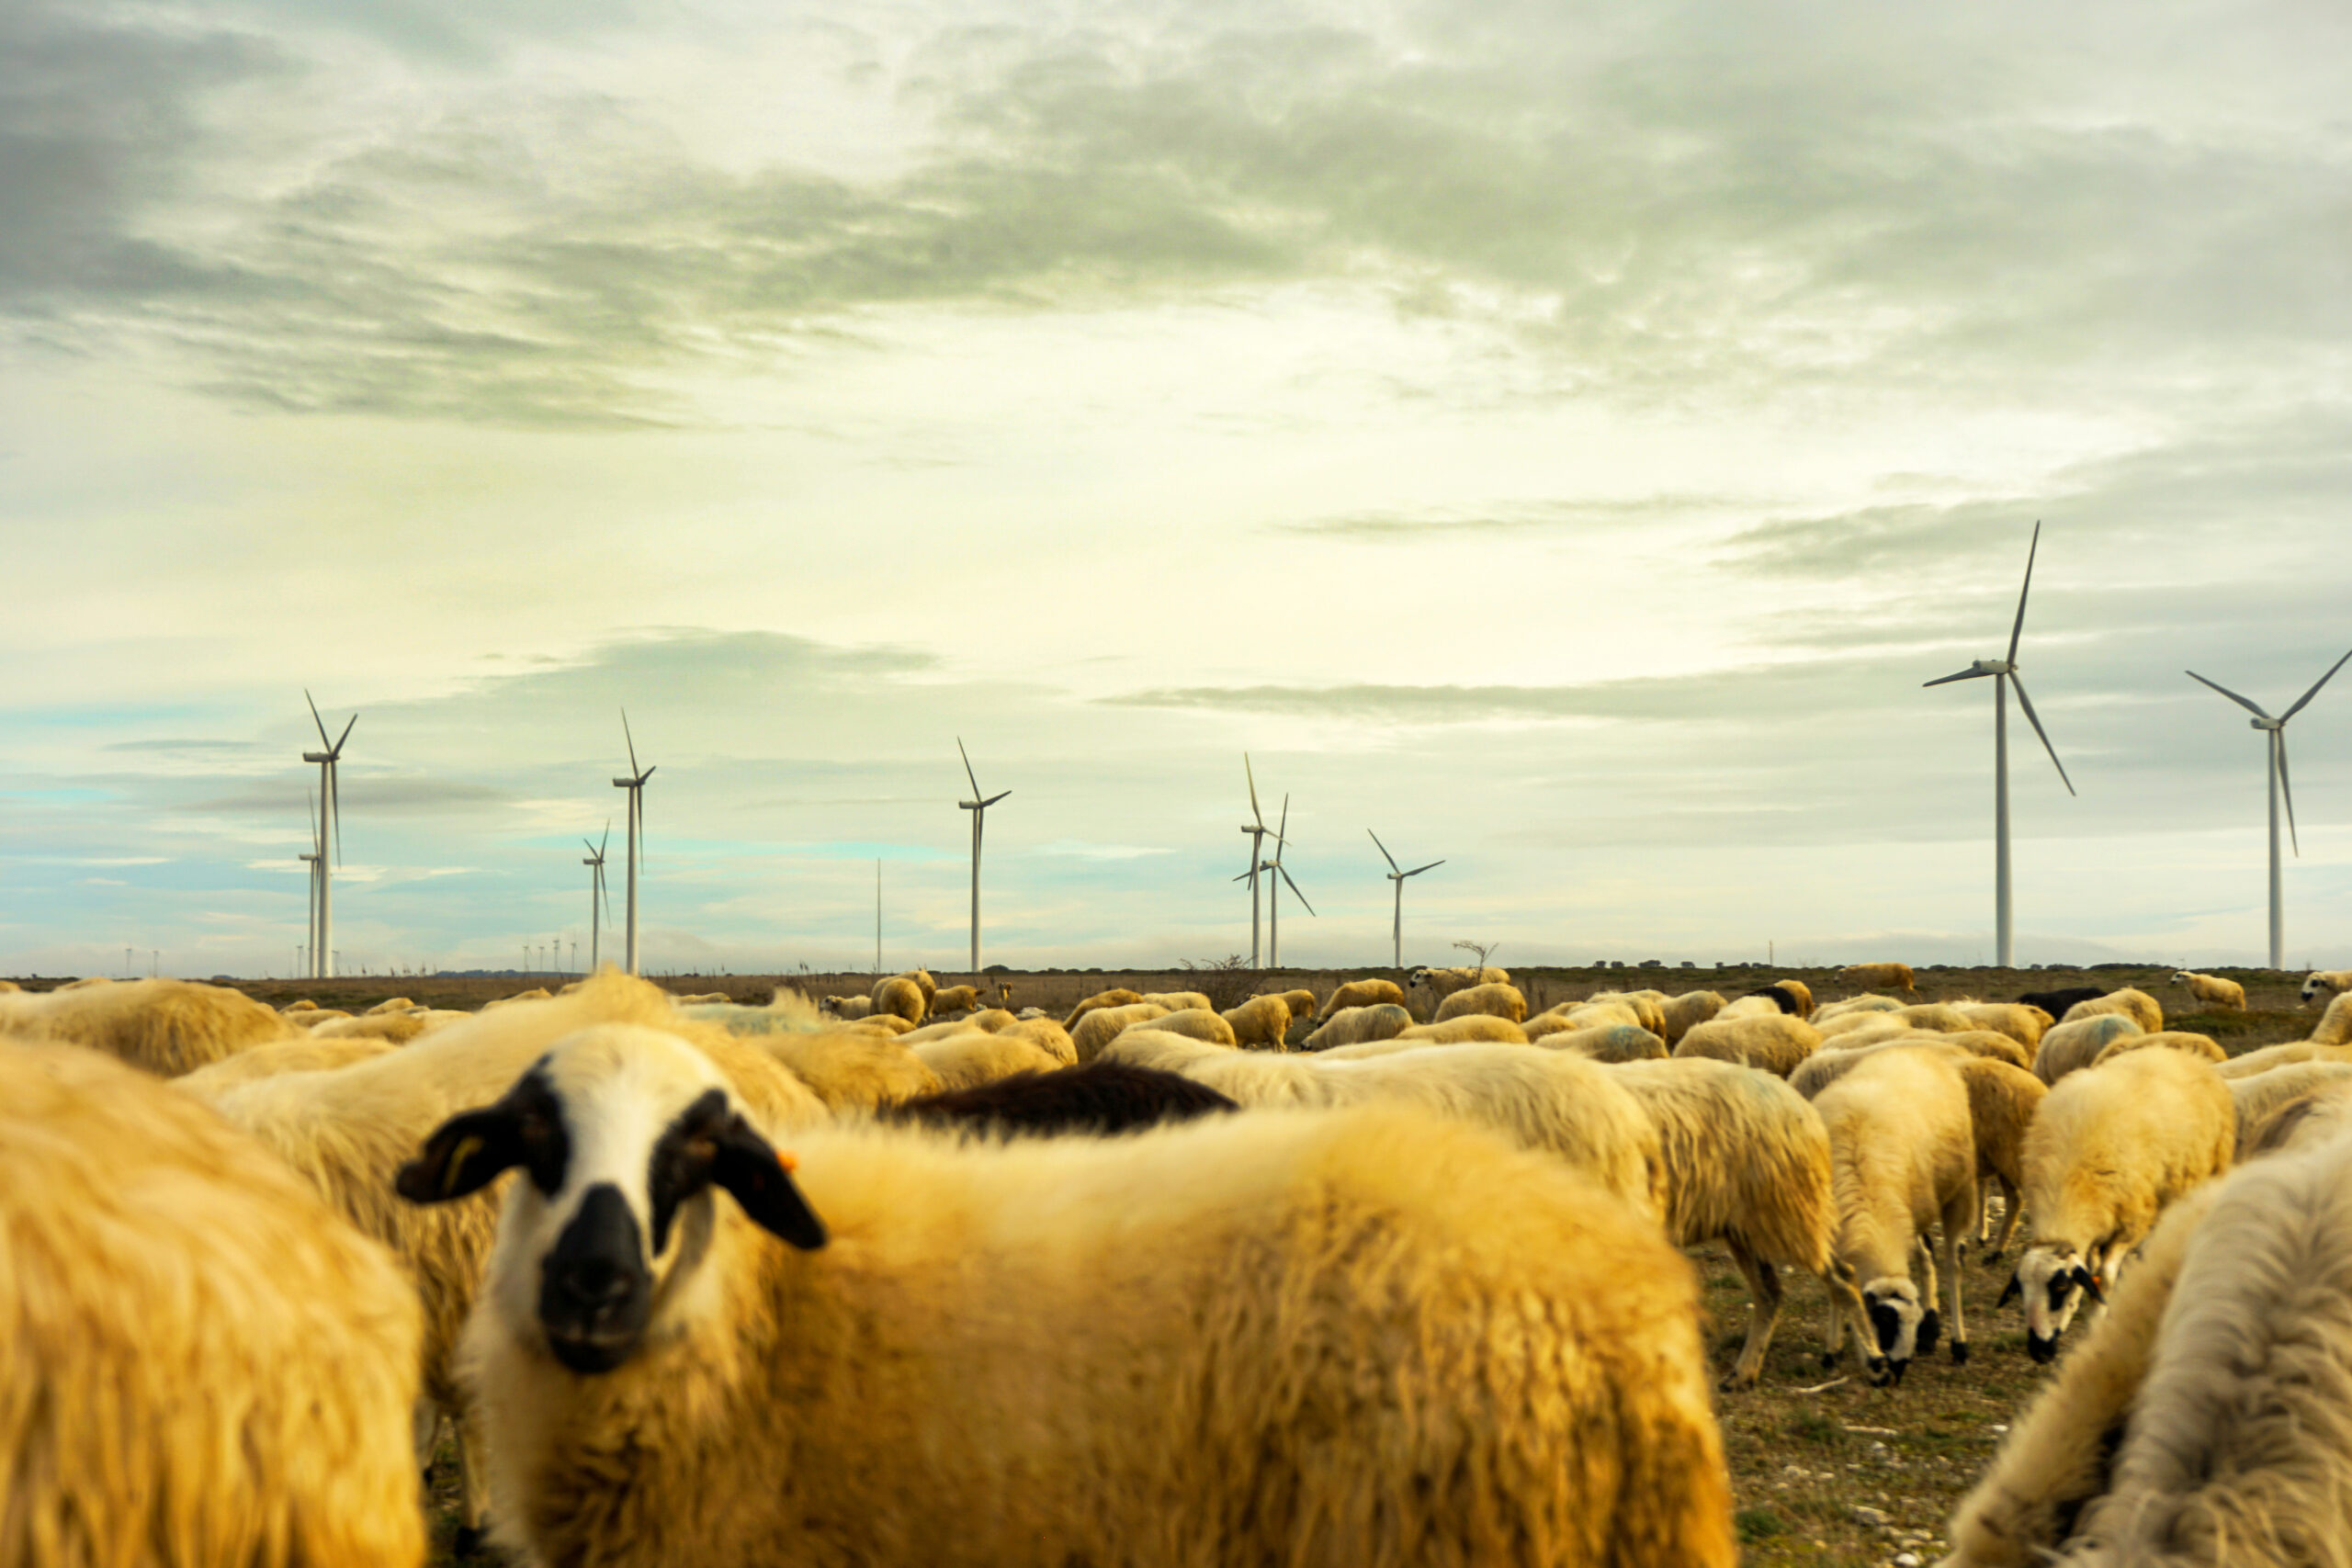 Sheep grazing at CTG Spain's Loras I wind farm in Burgos